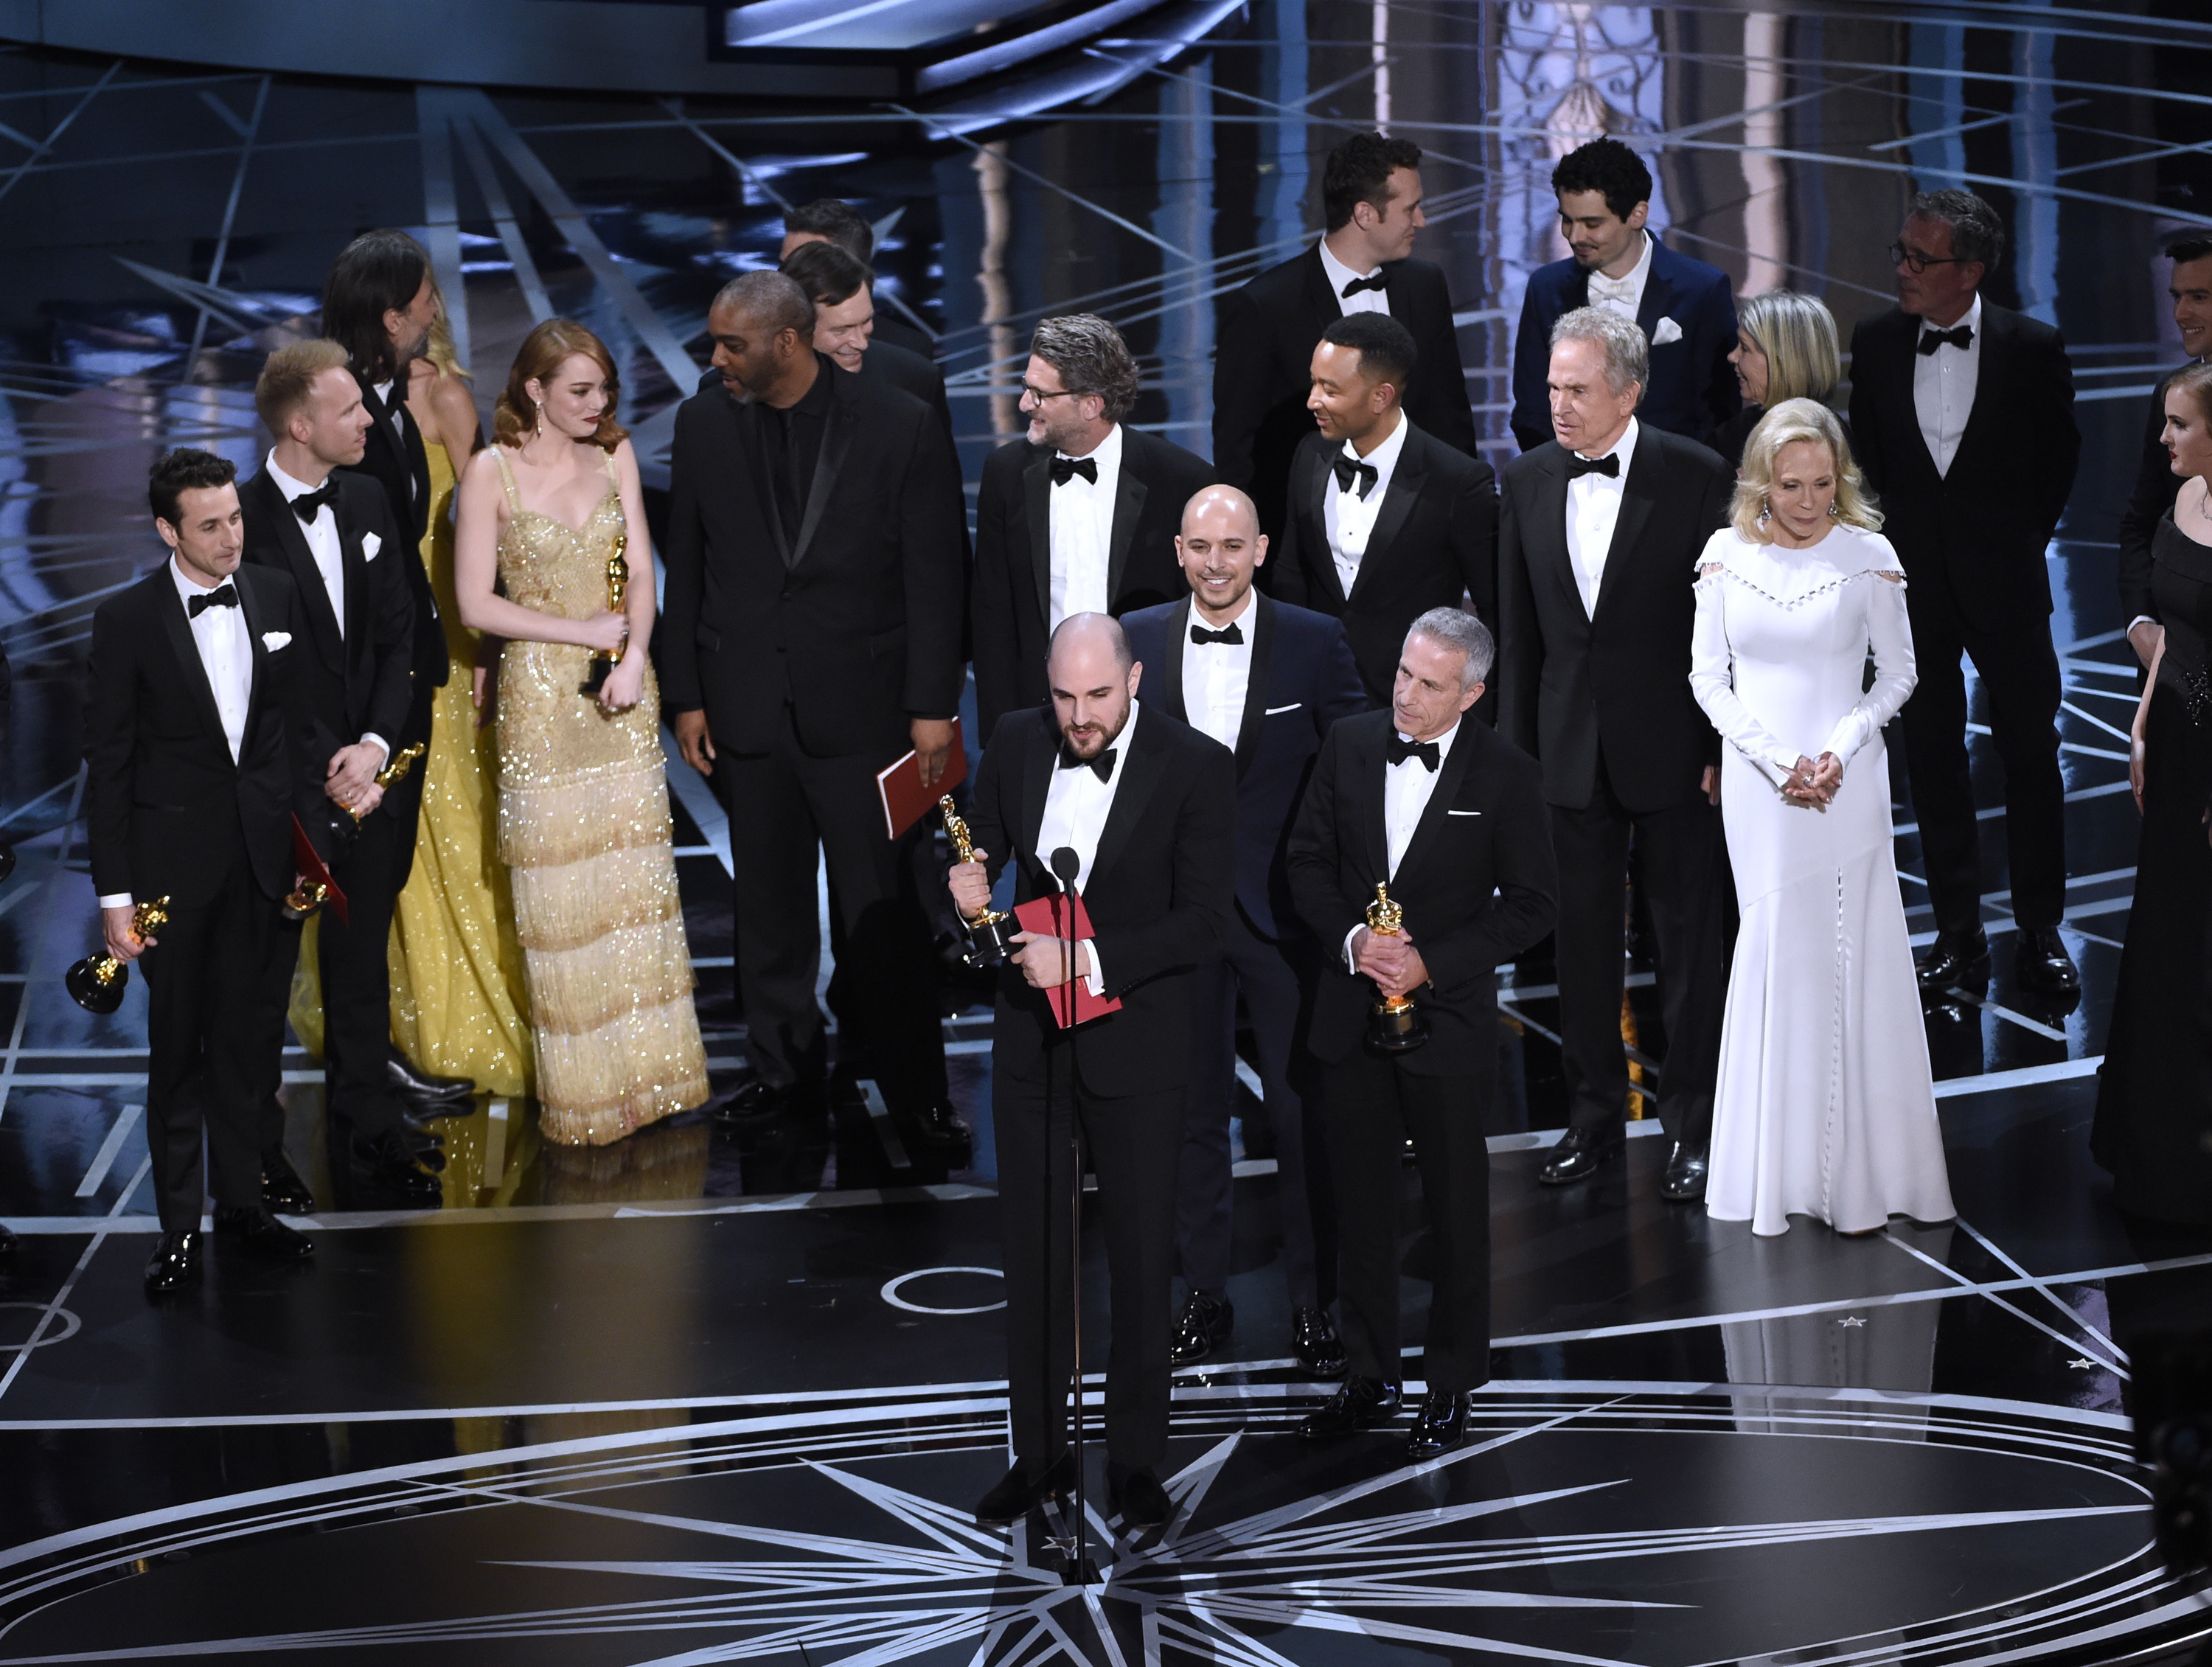 Jordan Horowitz, foreground center, and the cast of "La La Land" mistakenly accept the award for best picture at the Oscars on Sunday, Feb. 26, 2017, at the Dolby Theatre in Los Angeles. It was later announced that "Moonlight," was the winner for best picture.